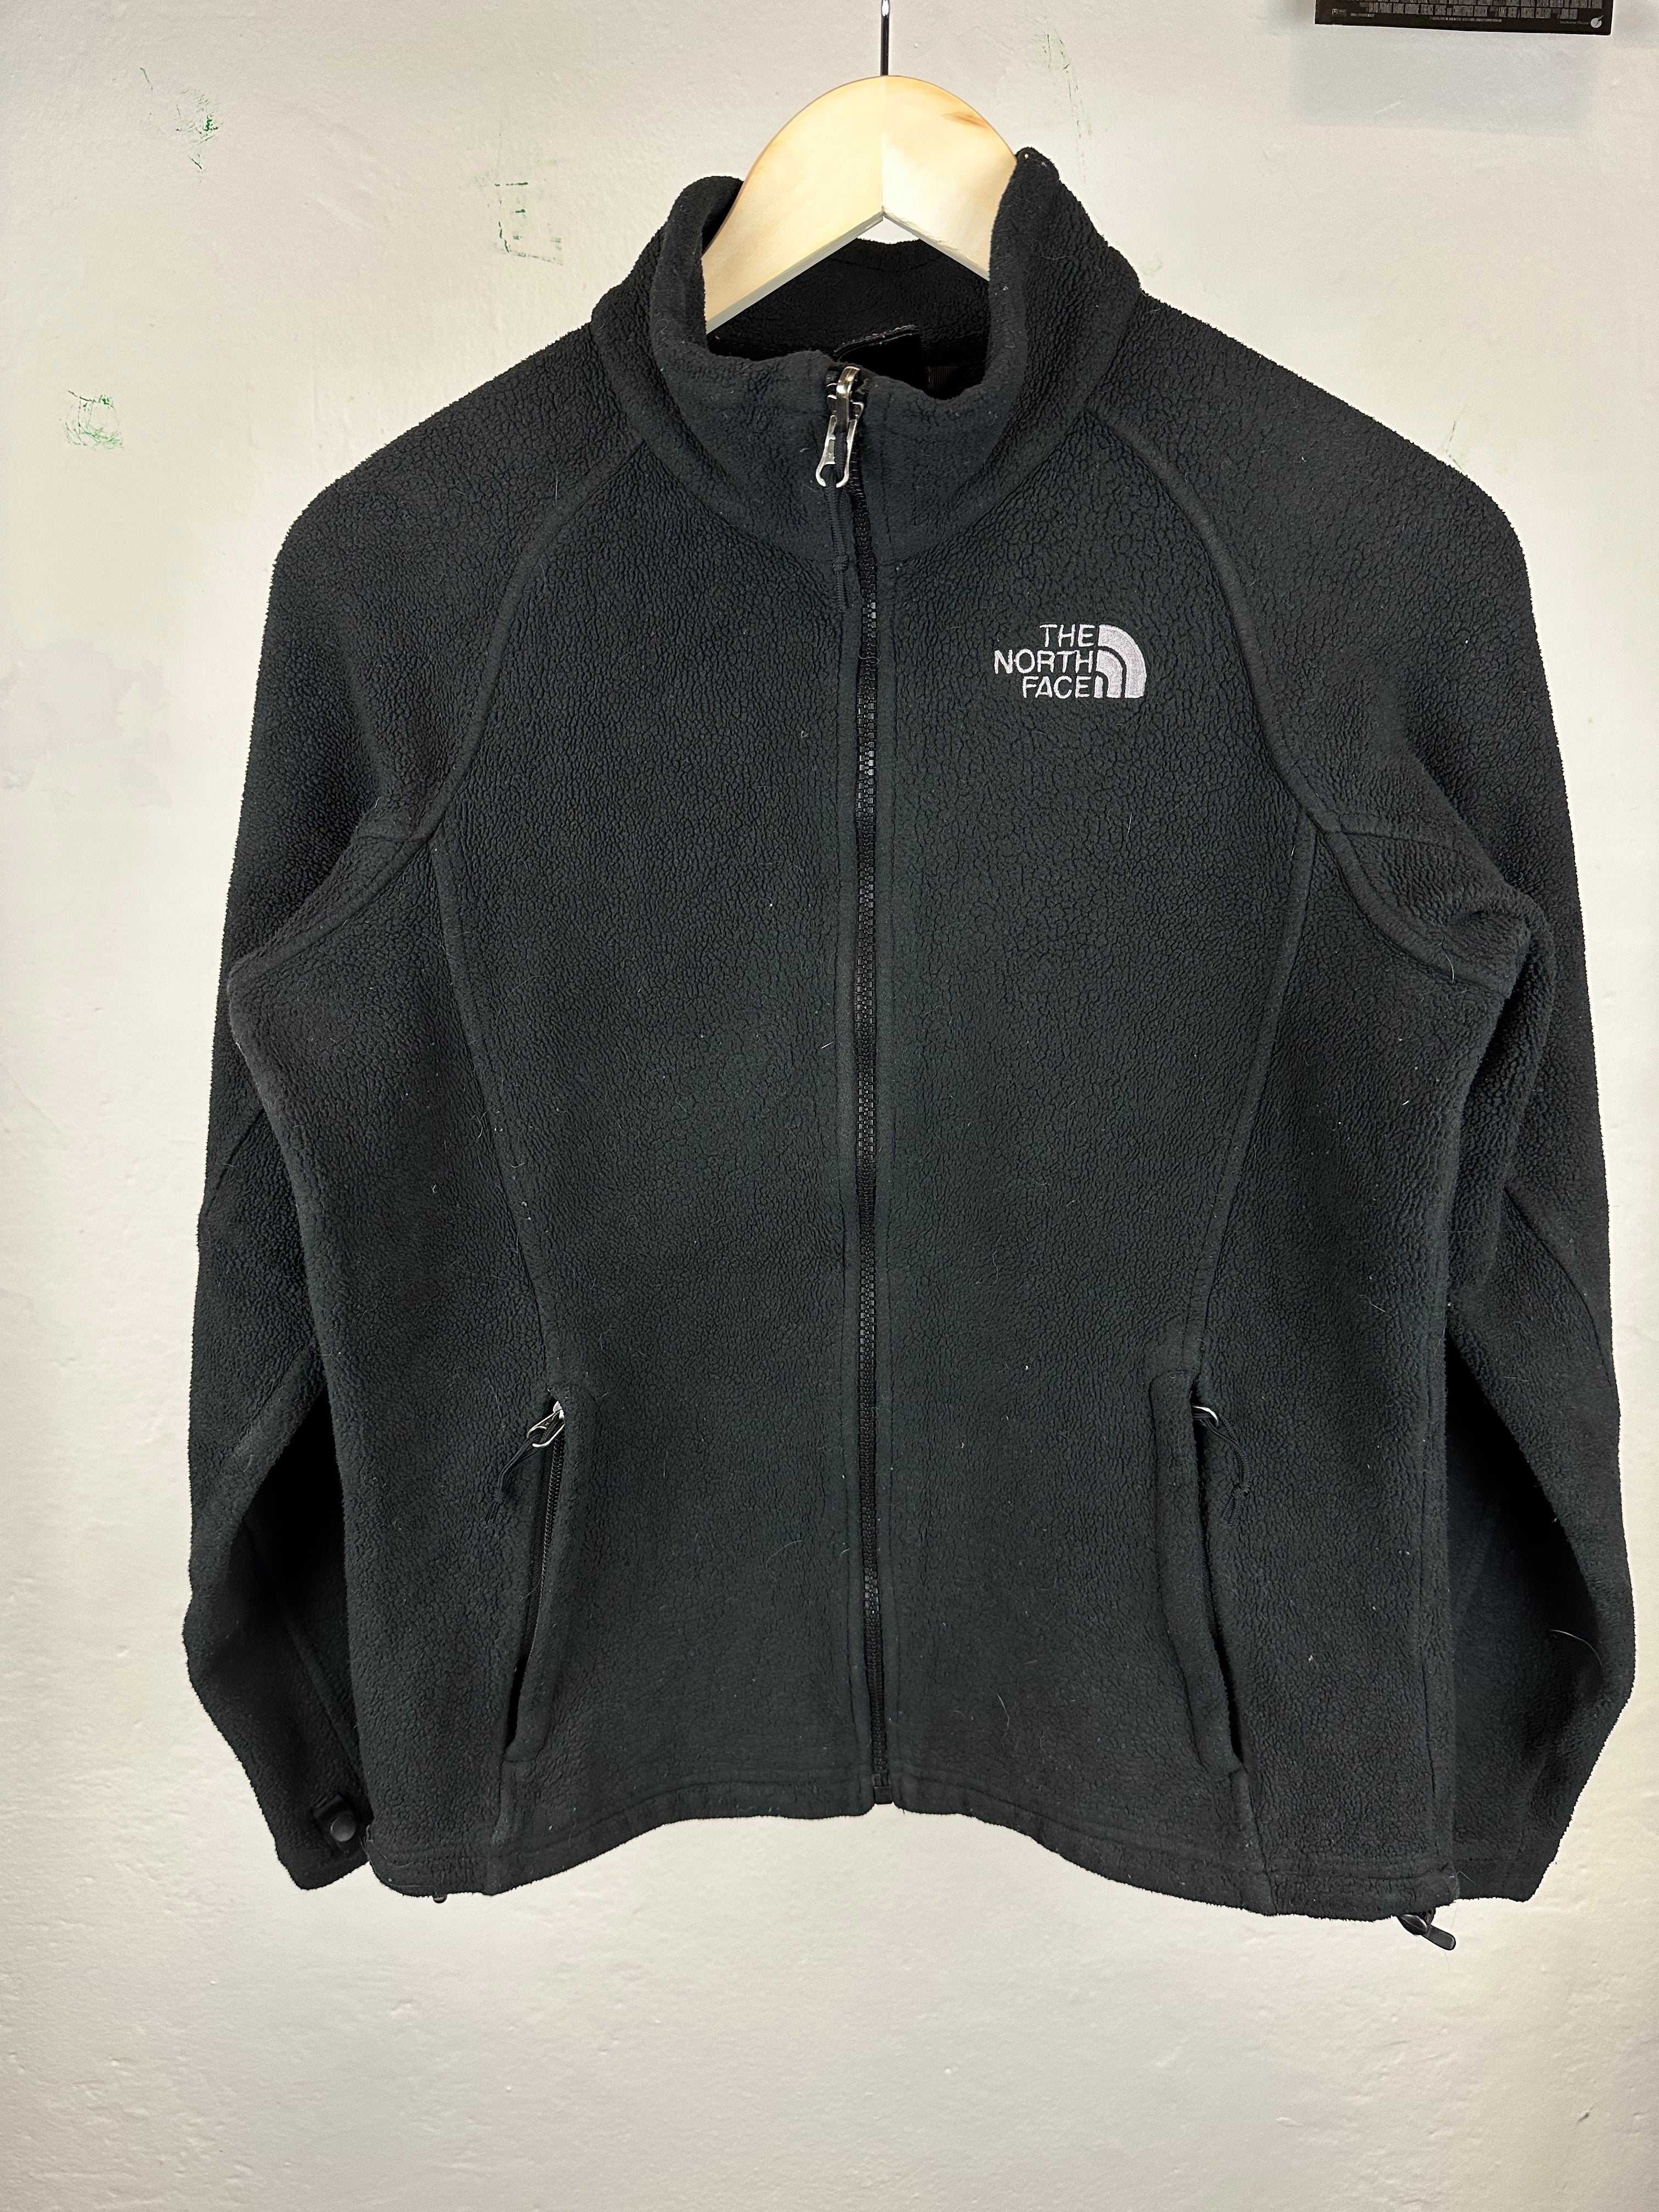 The North Face Fleece - size S